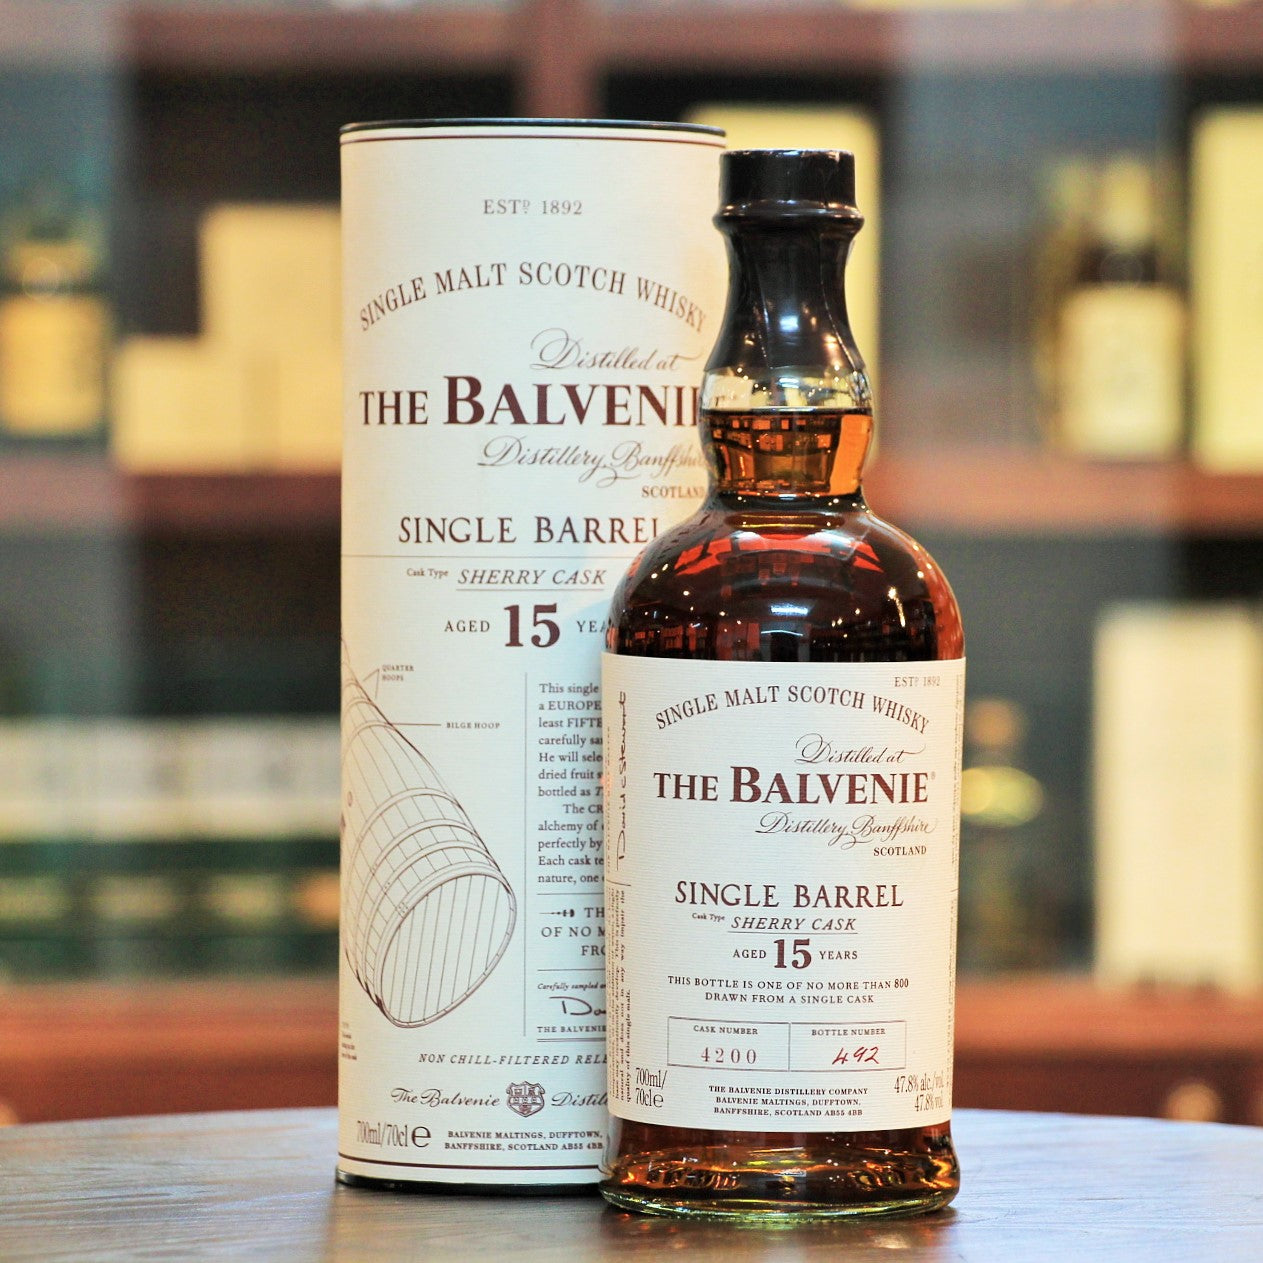 Balvenie 15 Years Single Barrel Sherry Cask Whisky, the characteristics of Balvenie's spirit and flavours of rich sherry oak, dried fruits and subtle spices overlaid with a soft nuttiness and a nice long finish.